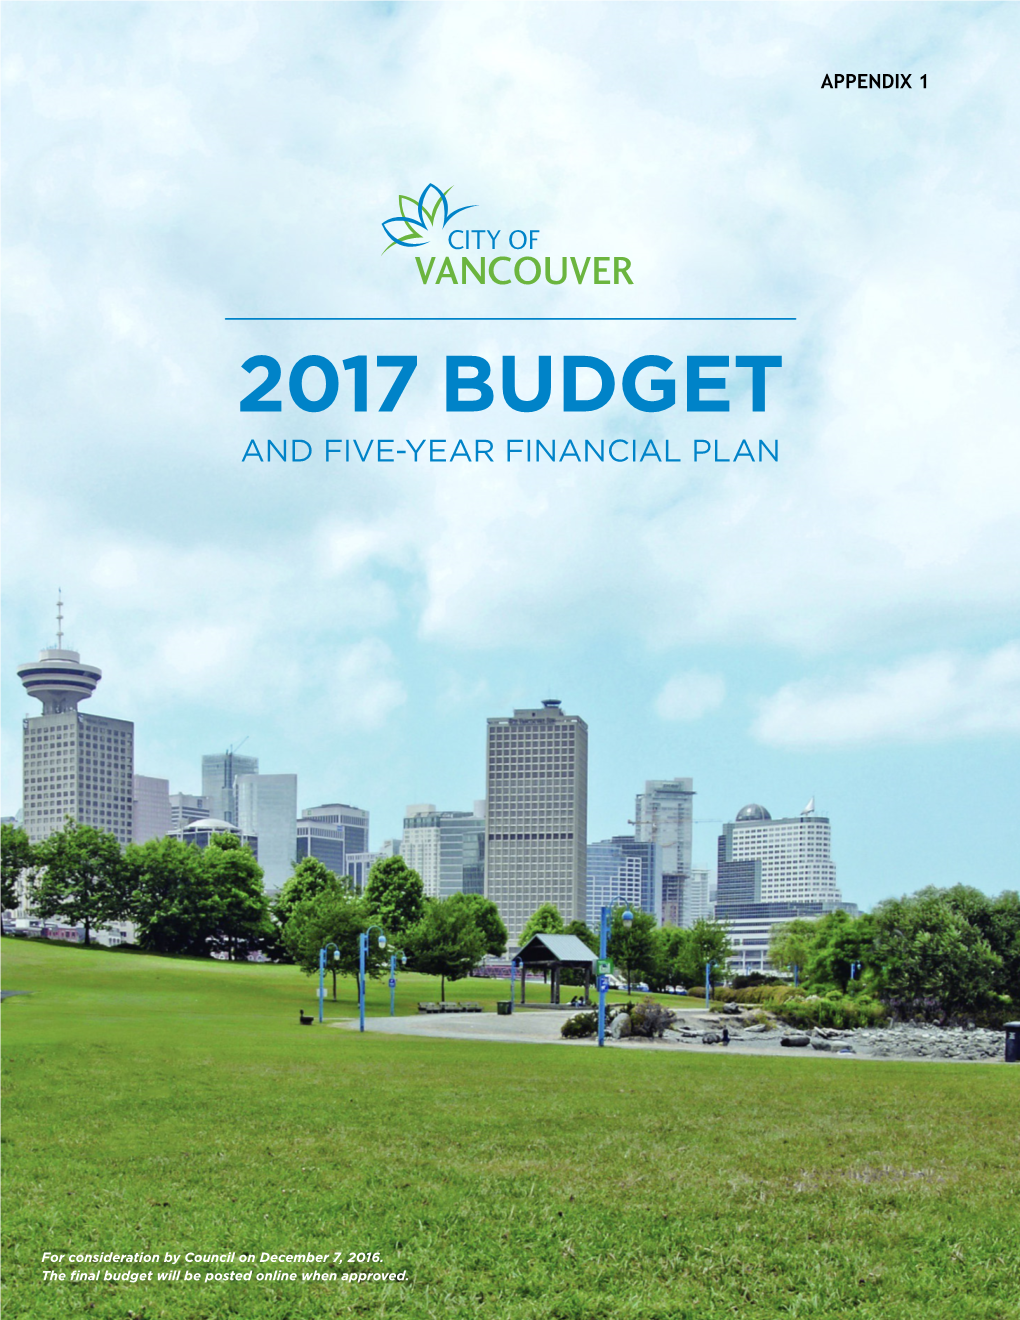 2017 Budget and Five-Year Financial Plan